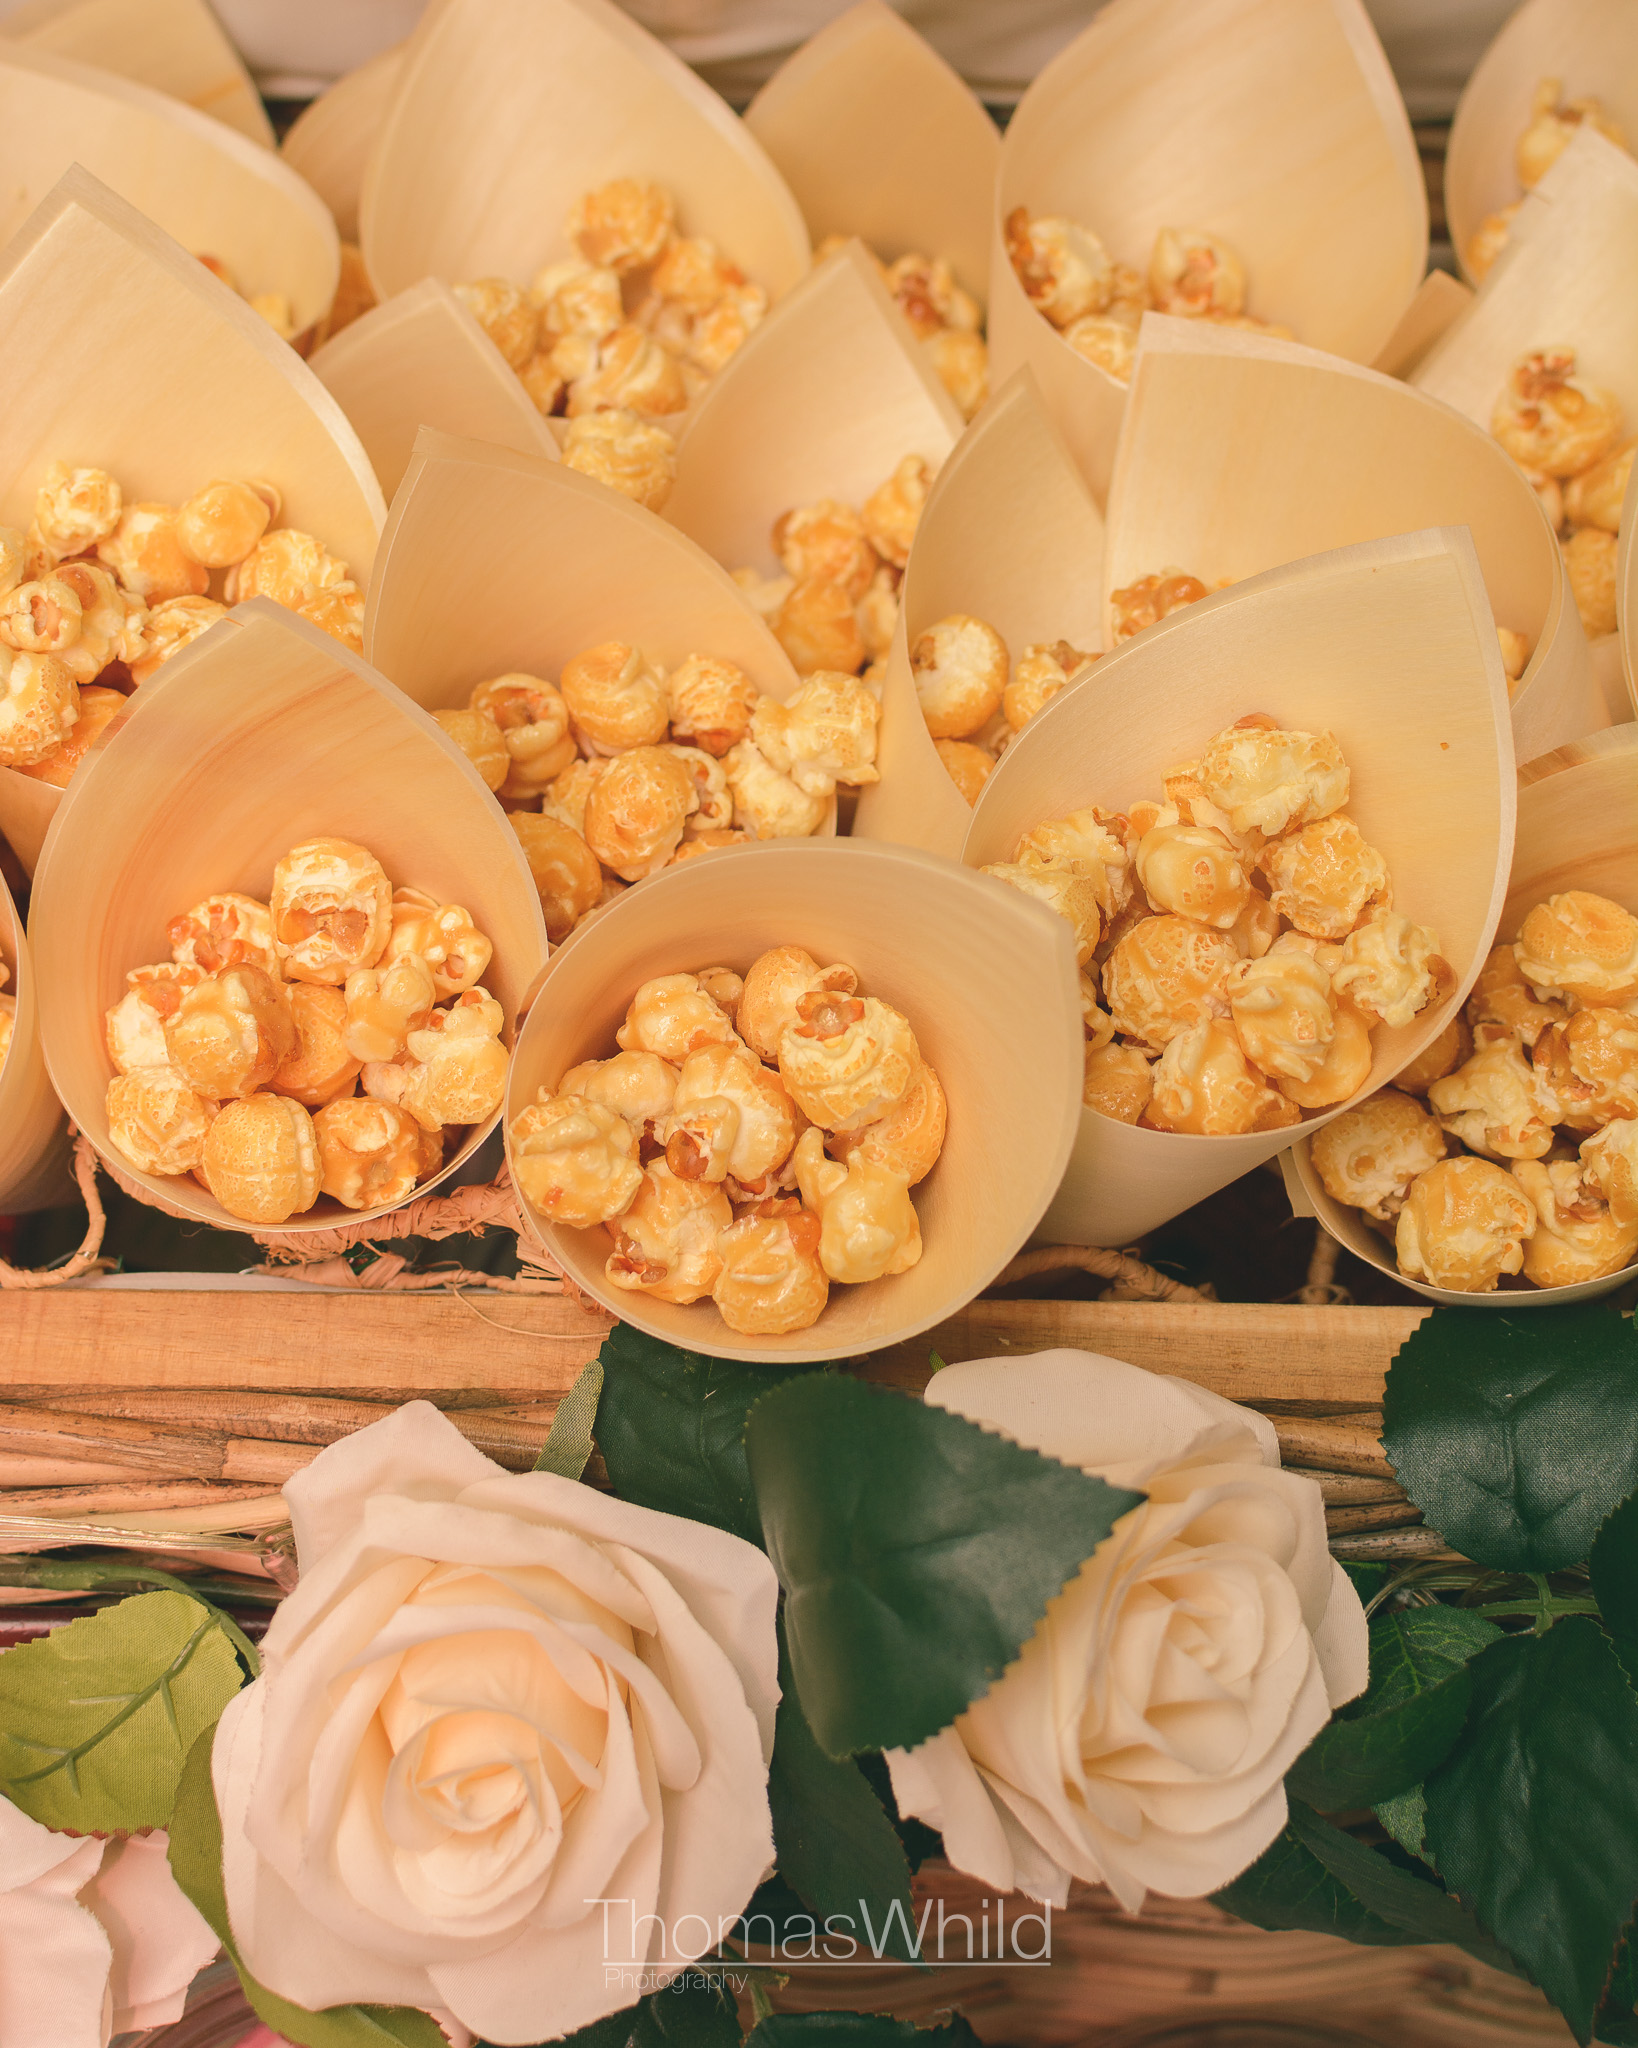 Sweets treats and wedding catering | Bournemouth Wedding Photographer | Thomas Whild Photography